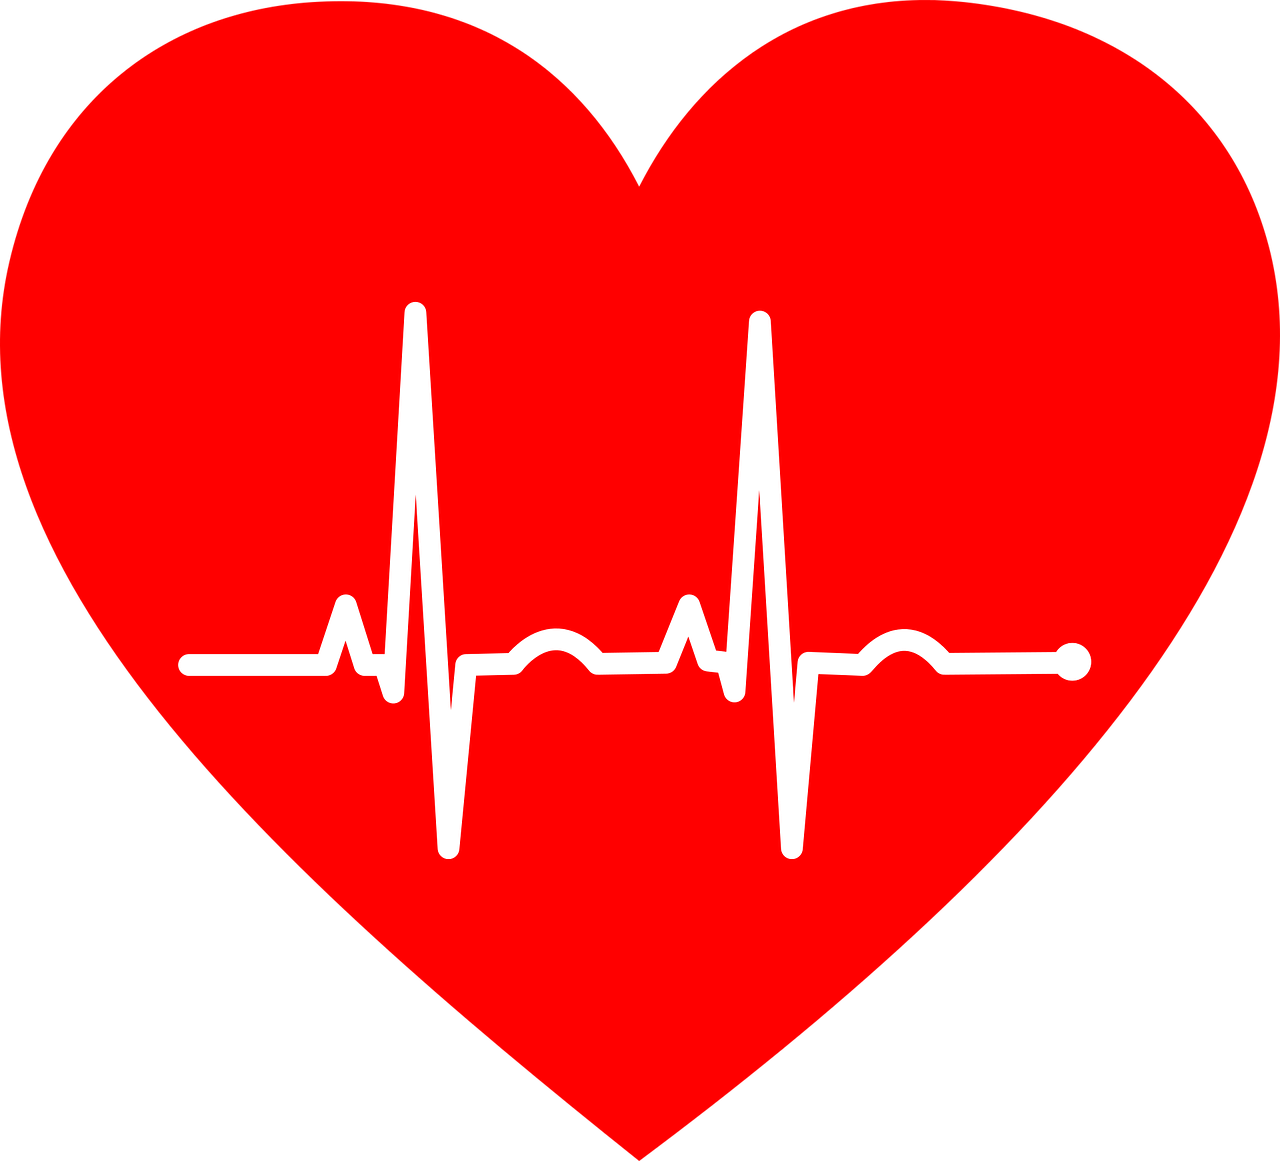 February is the heart month. Can we prevent heart diseases?